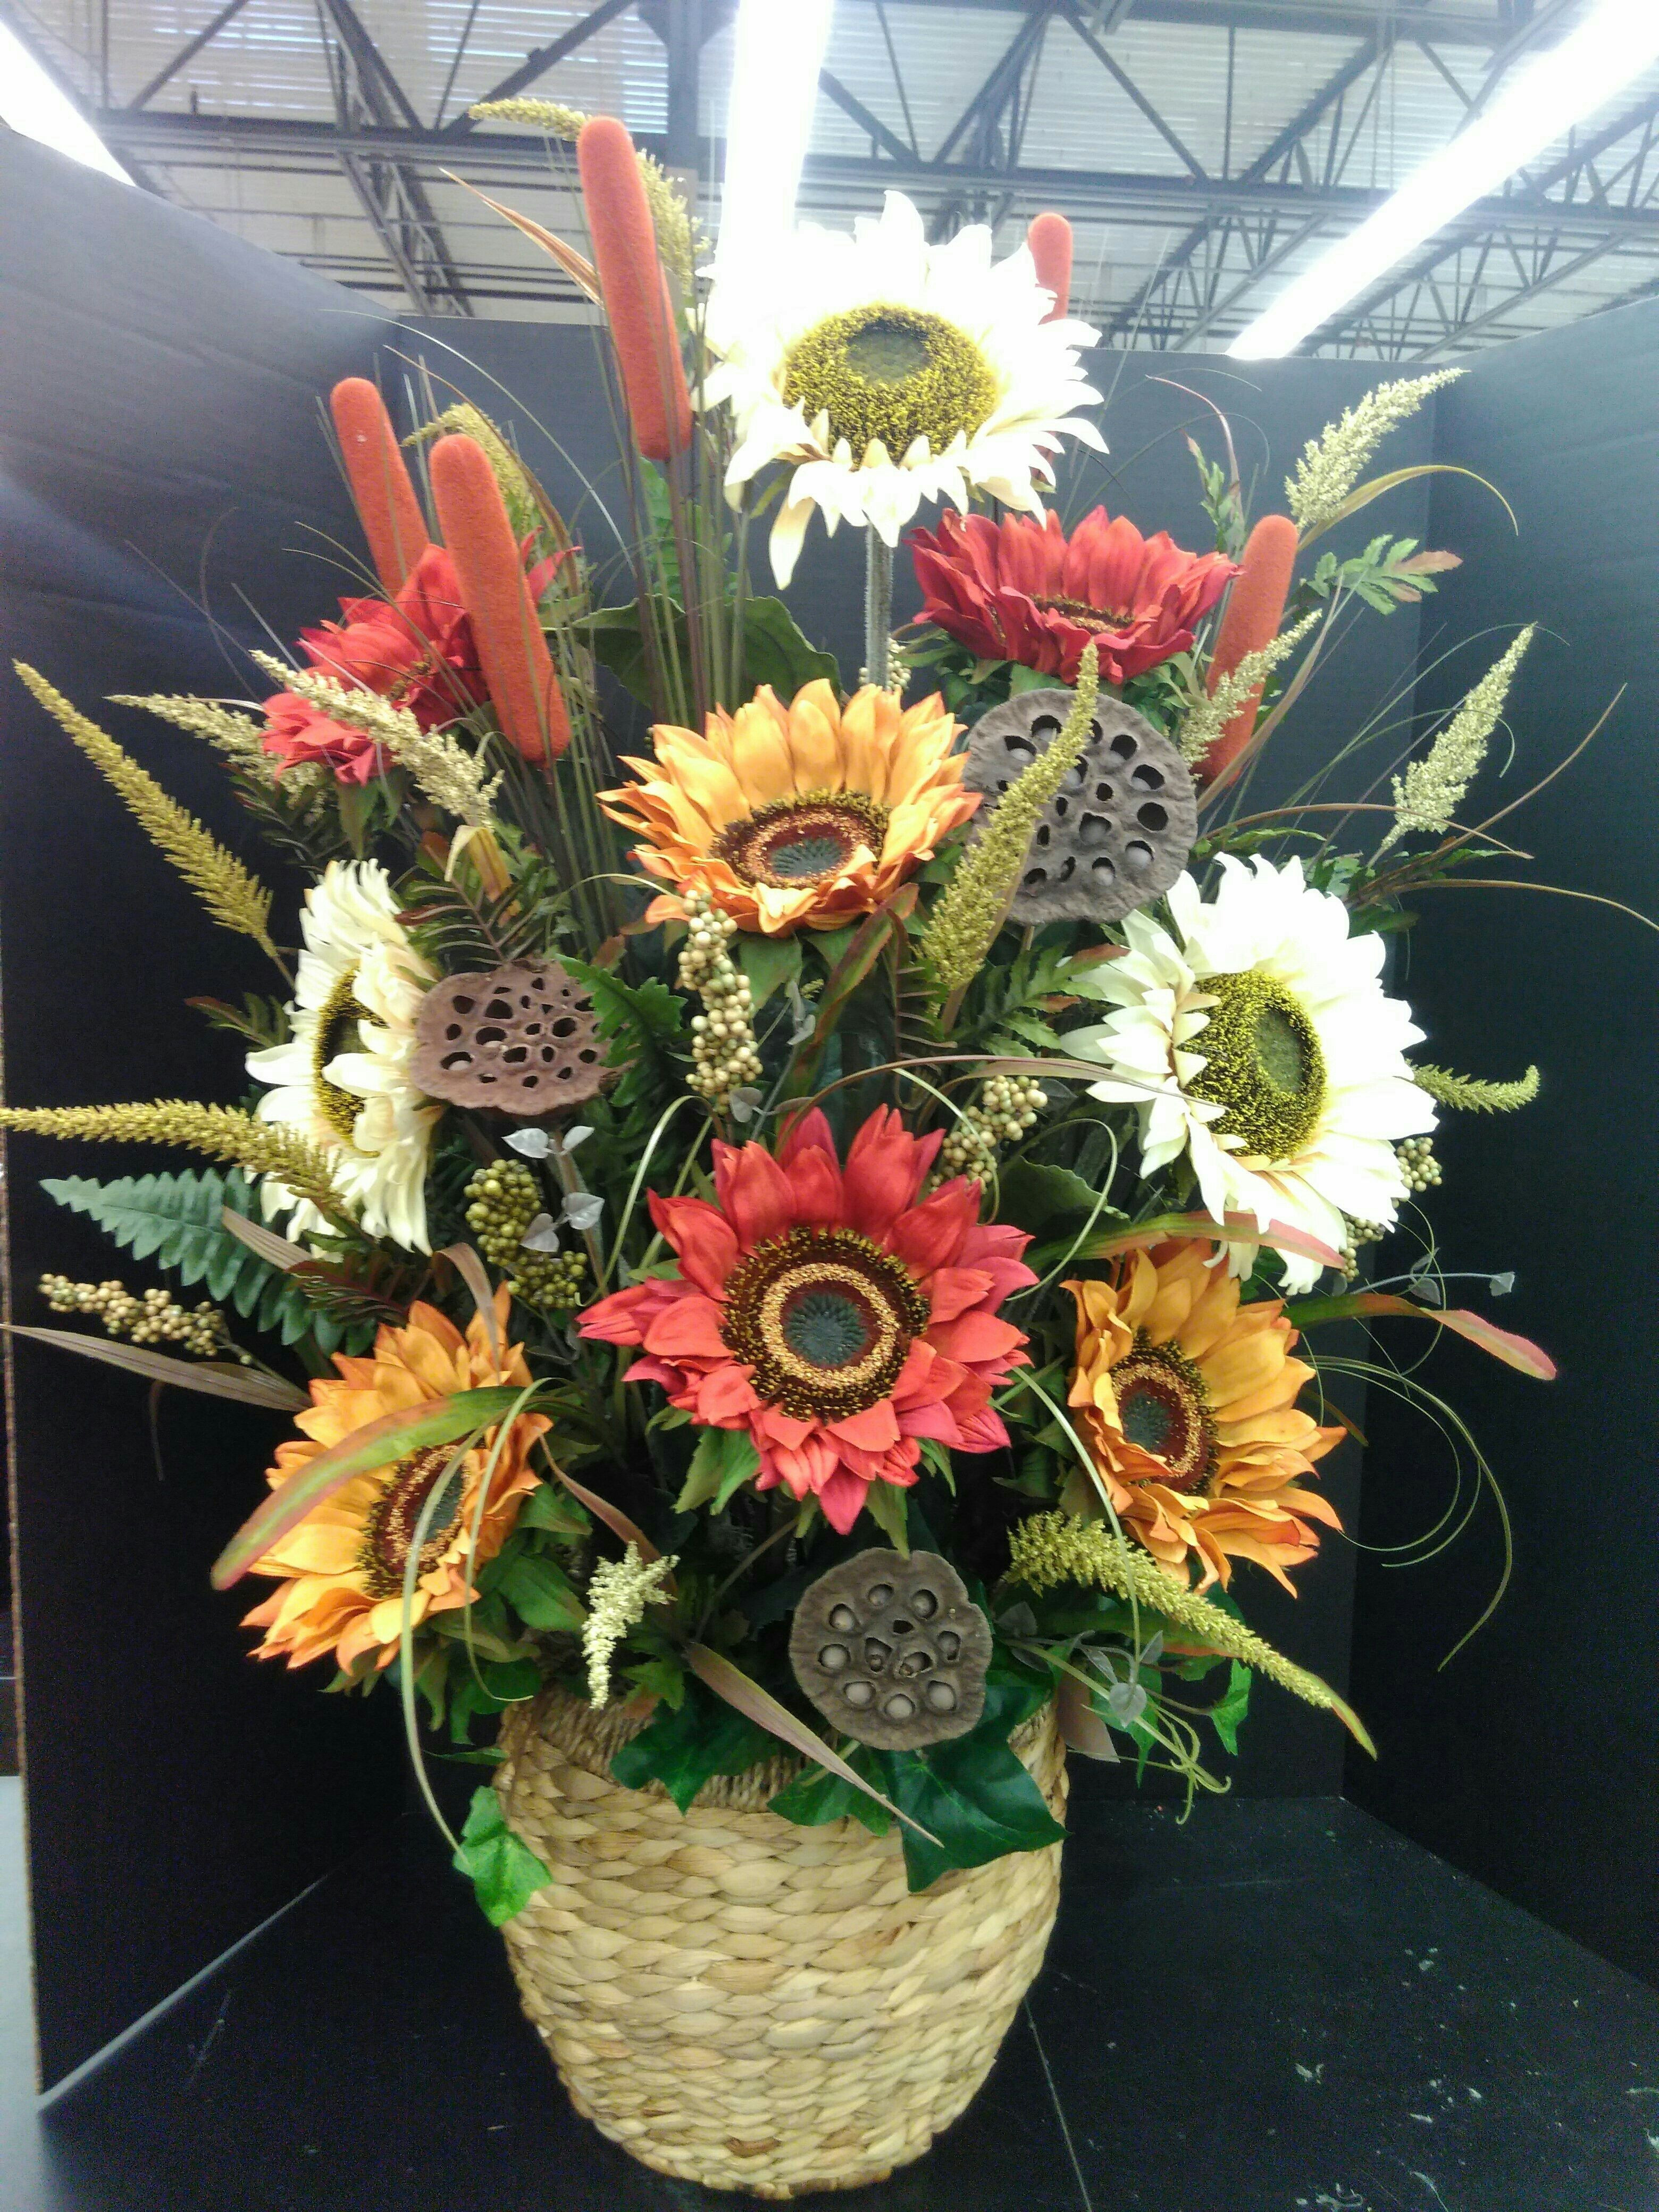 12 Stylish Ac Moore Vases 2024 free download ac moore vases of sunflower basket arrangement by teresa in our voorhees nj store with regard to sunflower basket arrangement by teresa in our voorhees nj store visit your local a c